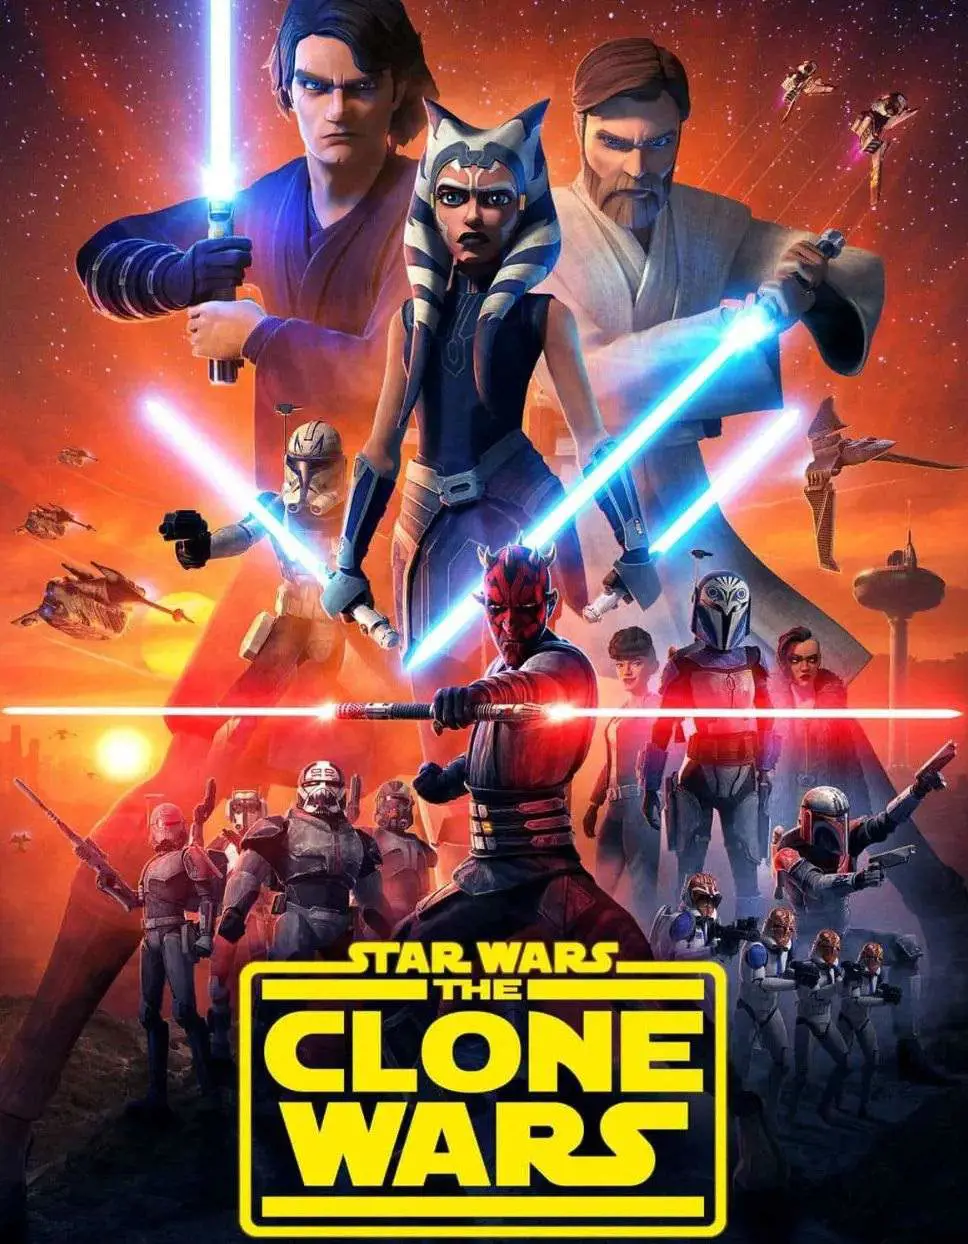 Star Wars: The Clone Wars is a computer-animated epic space opera film, which takes place shortly after Episode II – Attack of the Clones (2002)